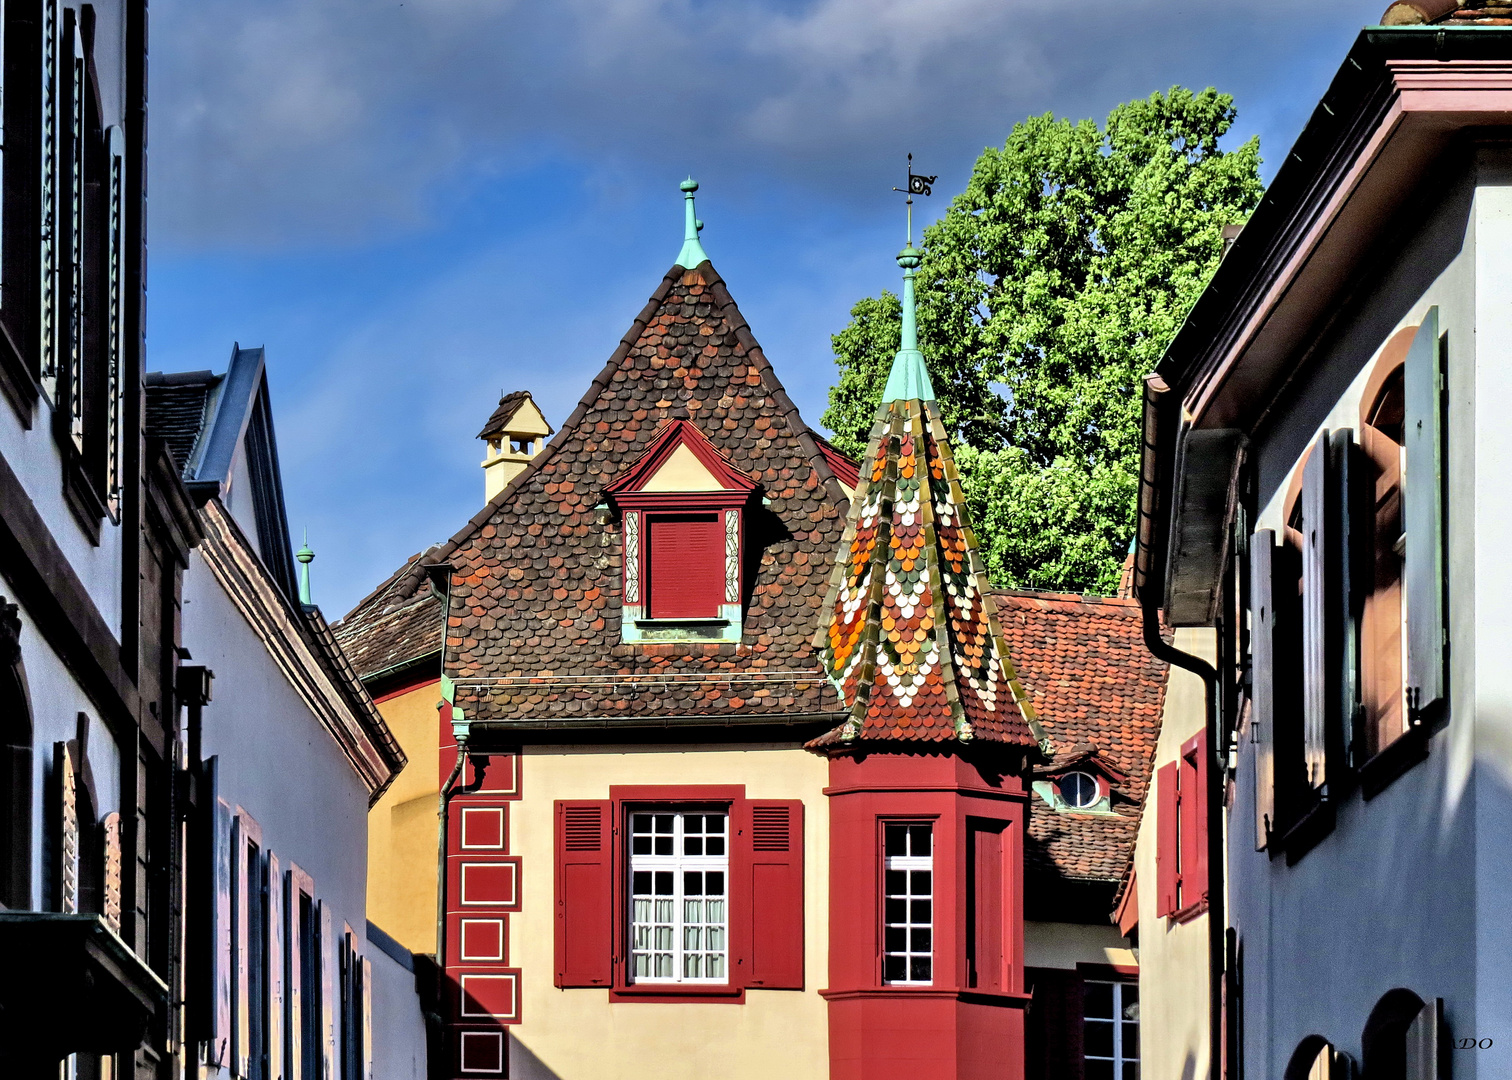 The Roofs of Basel